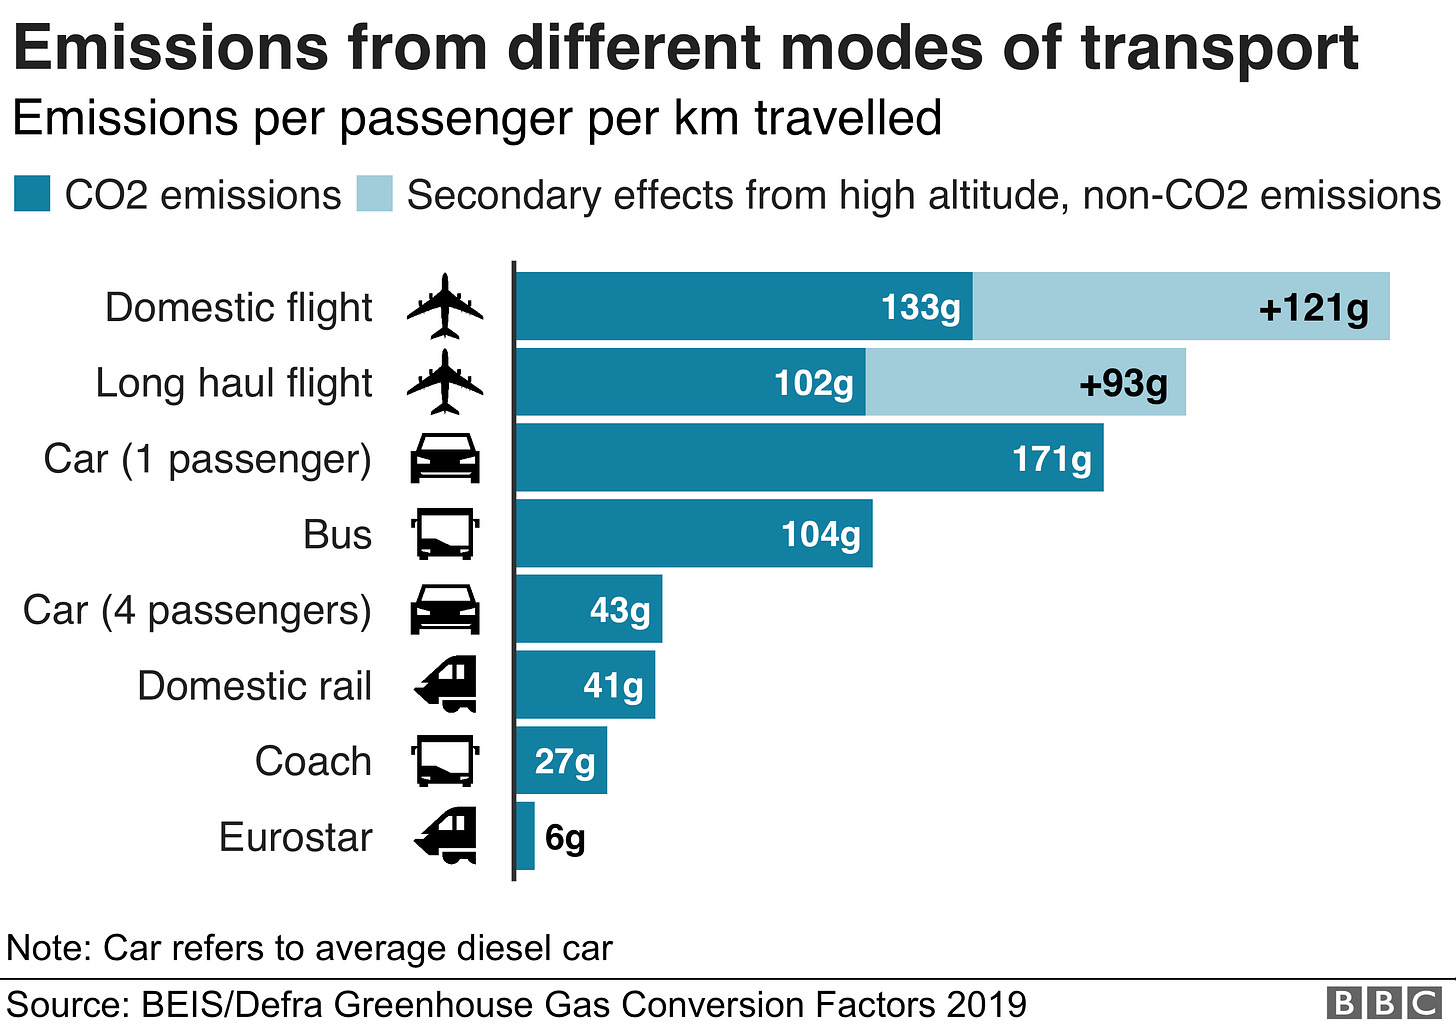 Graph of 'emissions from different modes of transport per passenger per km travelled.' Domestic flights are the highest-emitters, followed by long-haul flight, car with 1 passenger, bus, car with 4 passengers